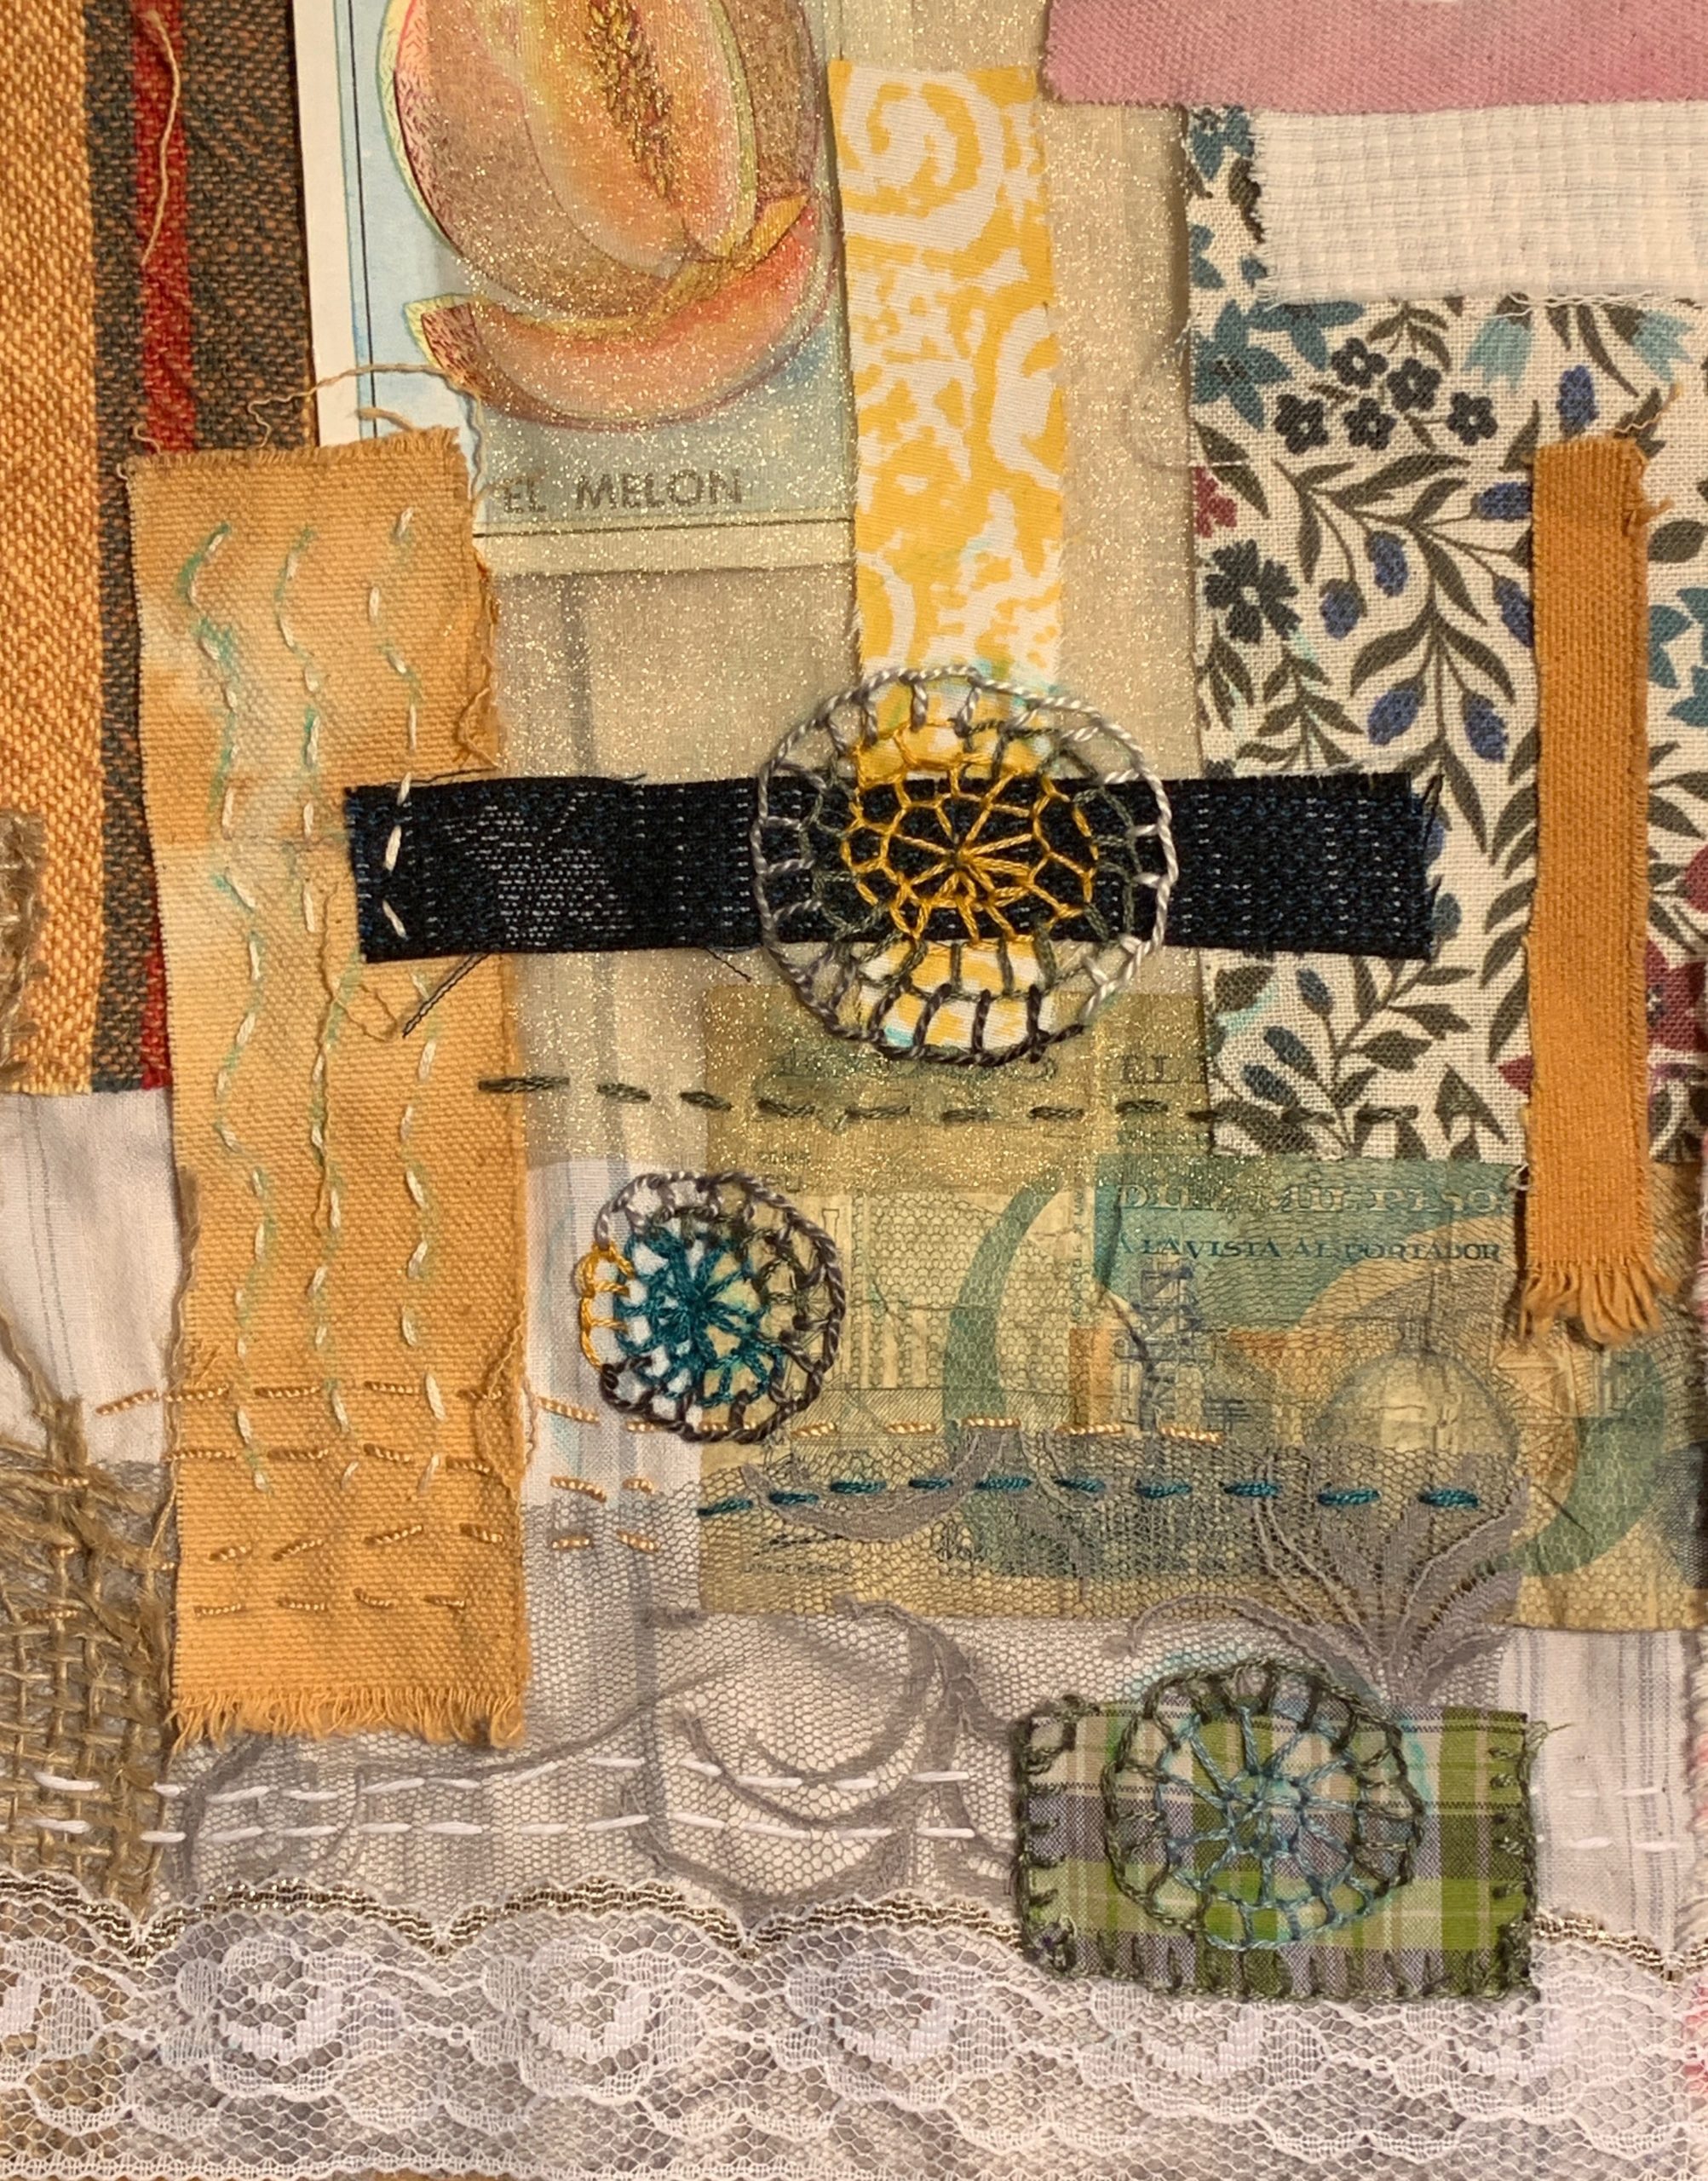 Boro – Items received in the envelopes from workshop participants. Attached to piece of my mother's smock that she wore while painting. Embellished with embroidery. 